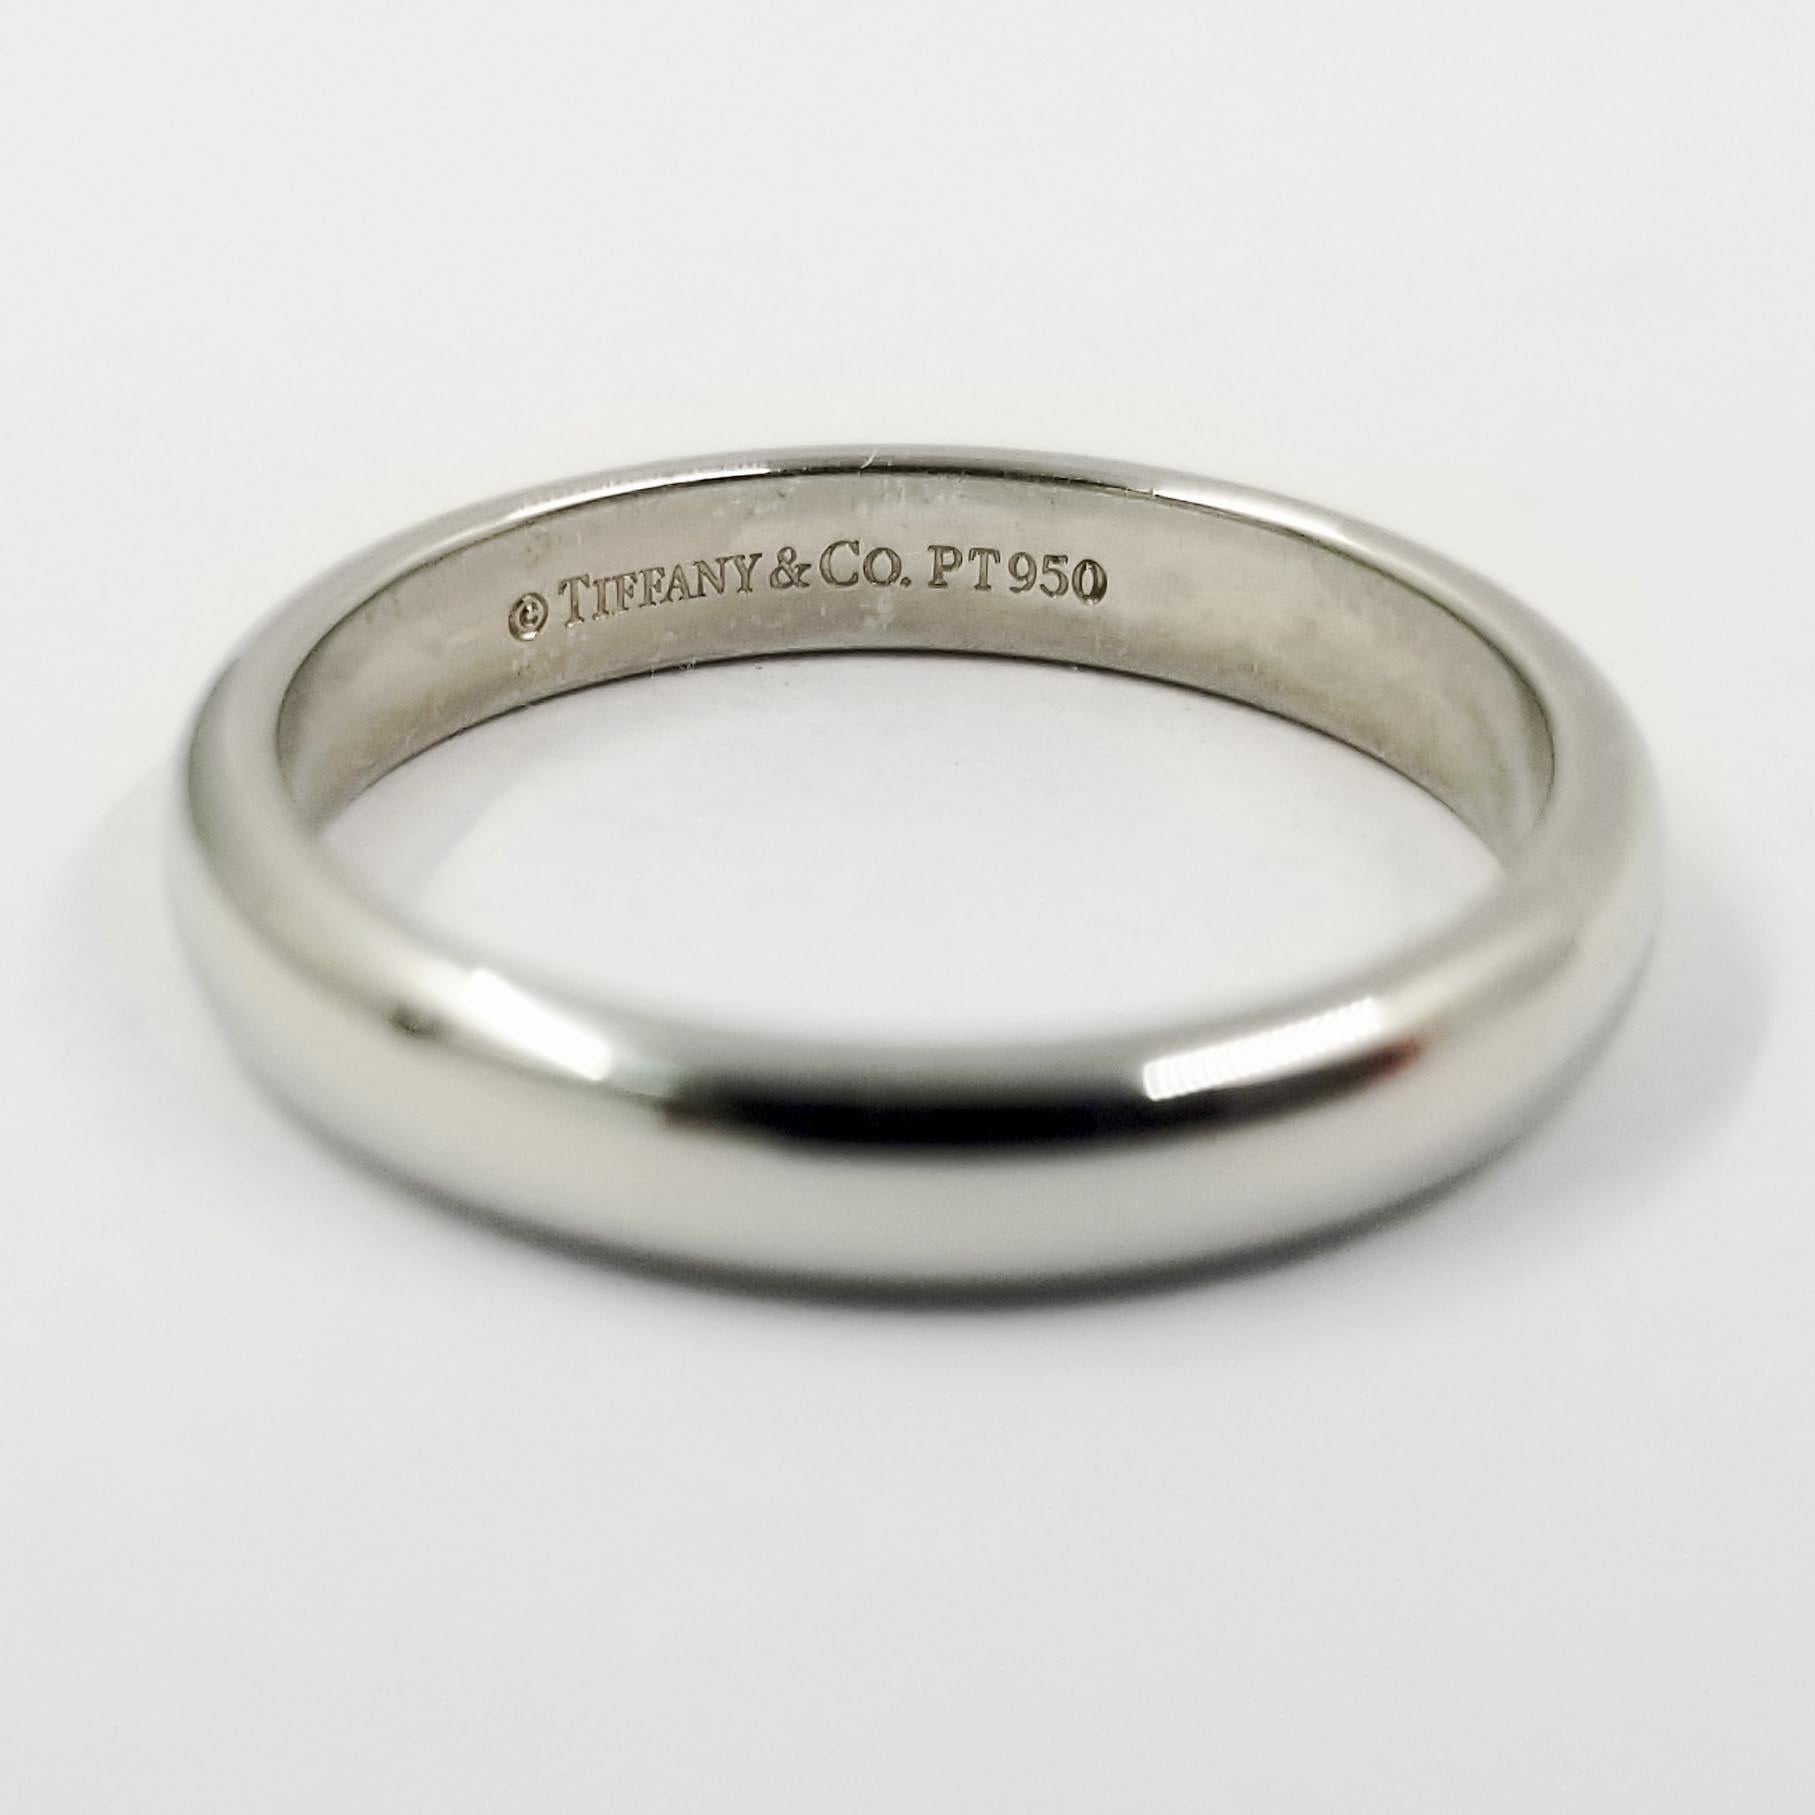 This simple half round wedding band from Tiffany & Co is crafted in platinum with a high polish shine. The interior is stamped PT950. Width is approximately 3.1 millimeters. Current finger size is 5.5; purchase includes free sizing (up or down 1